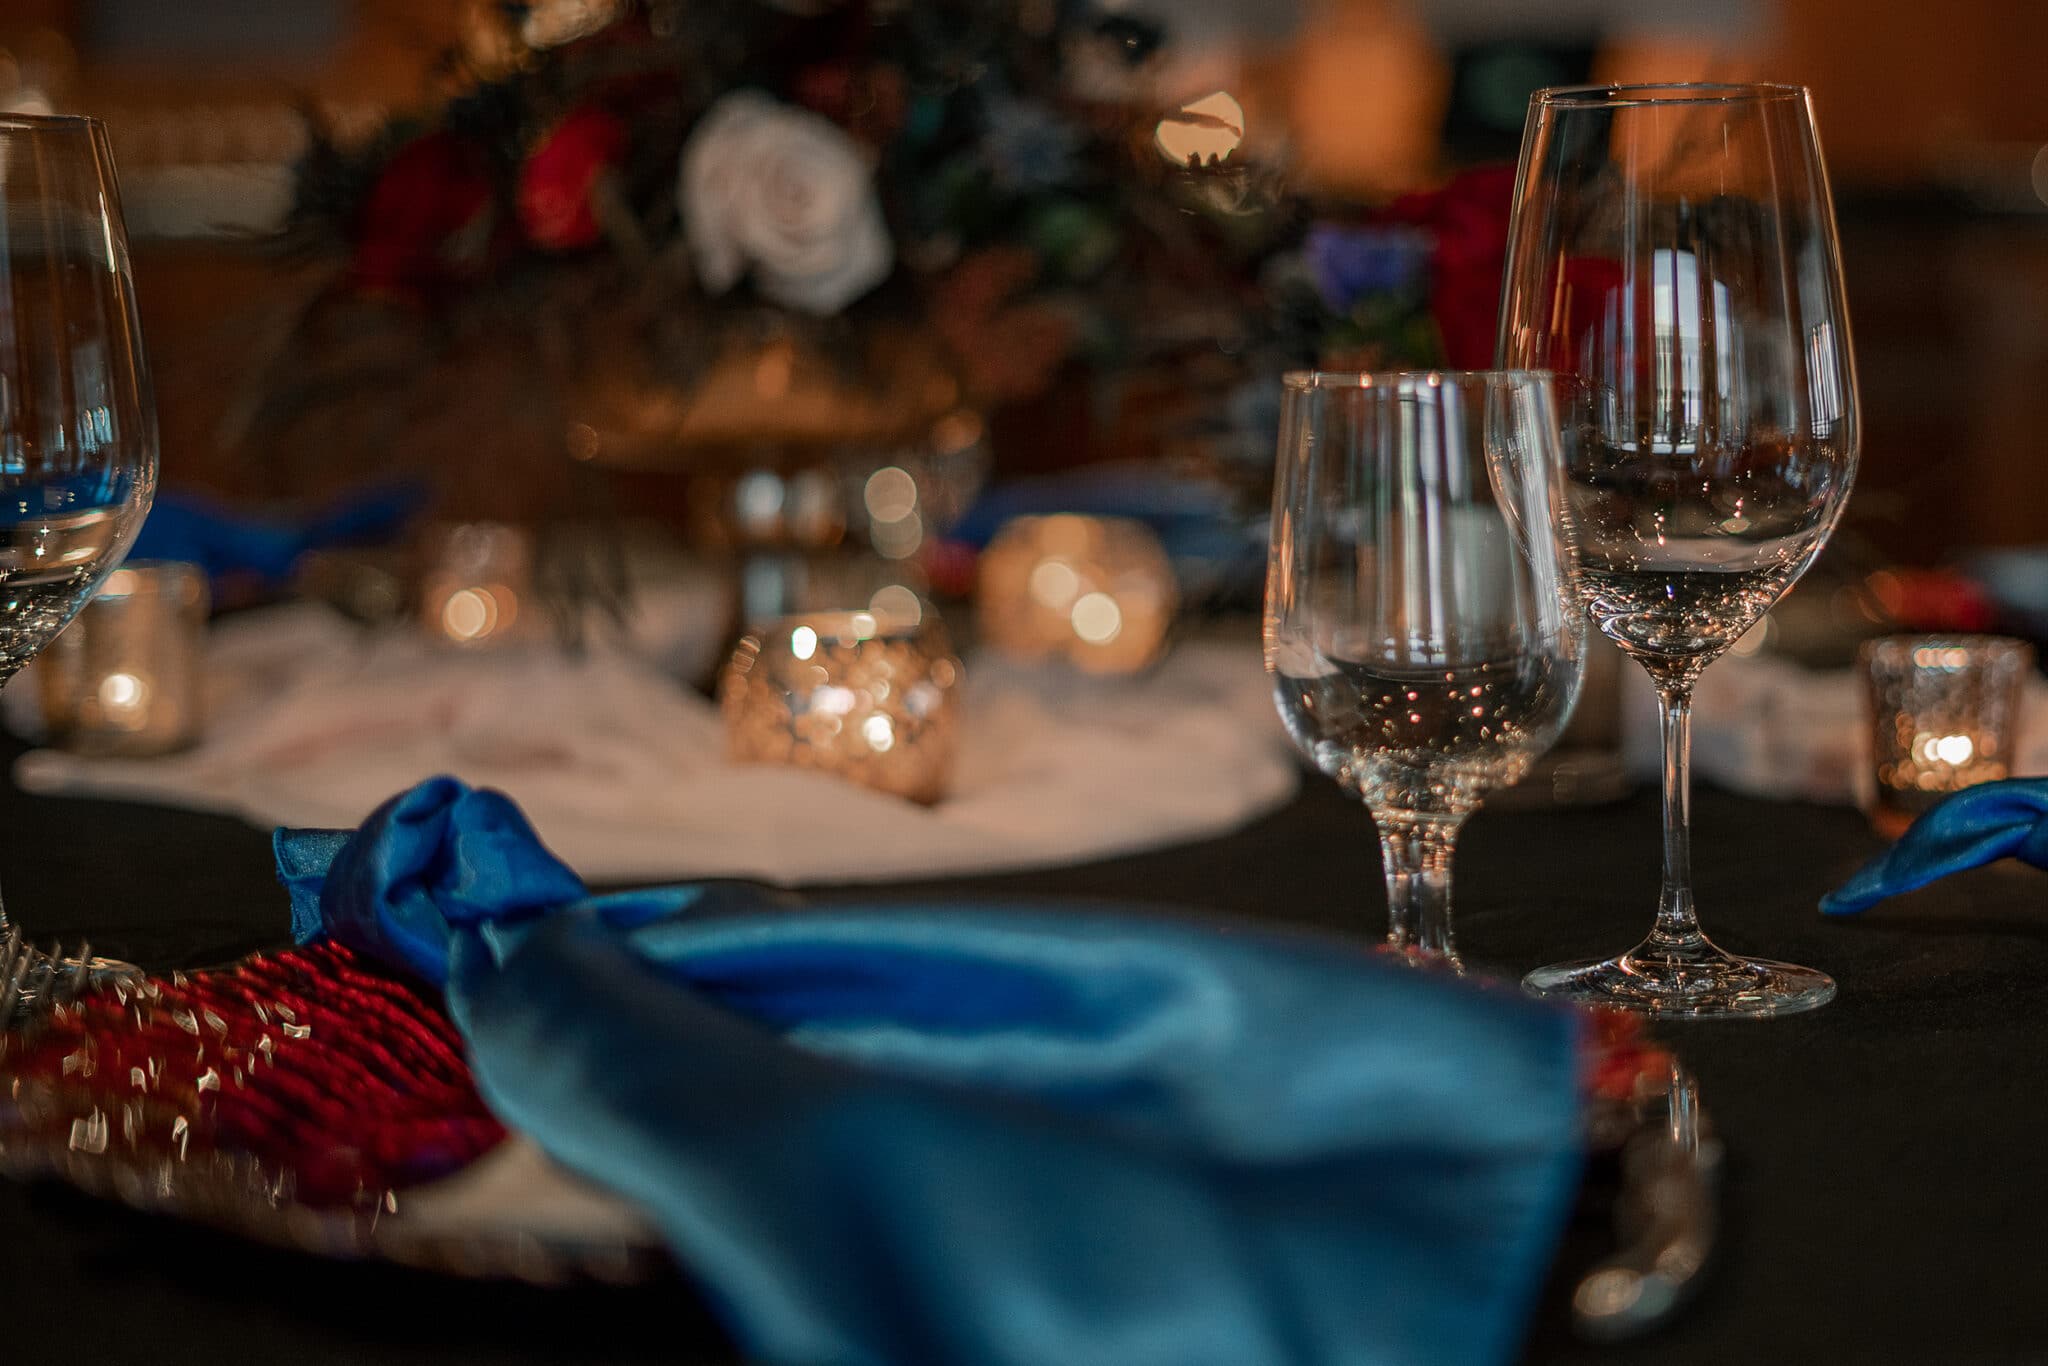 A table set awaiting the start of an event, decorated with red charger plates, blue napkins, candles, and a bouquet of roses, pictured close up